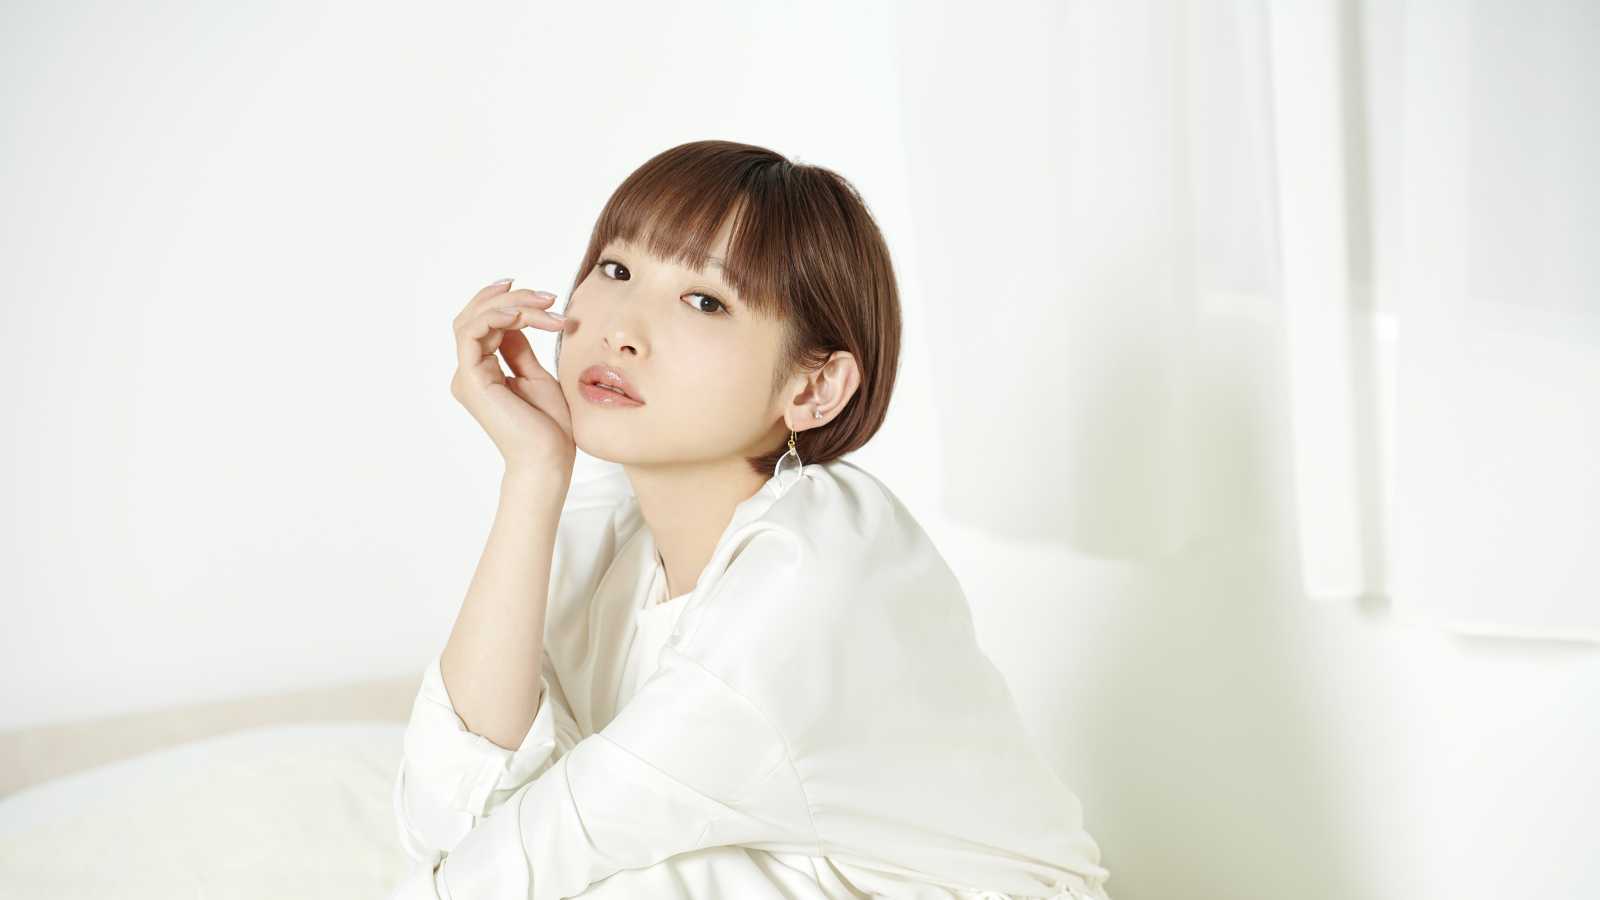 Nowy singiel Yoshino Nanjo © NBCUniversal Entertainment Japan. All rights reserved.